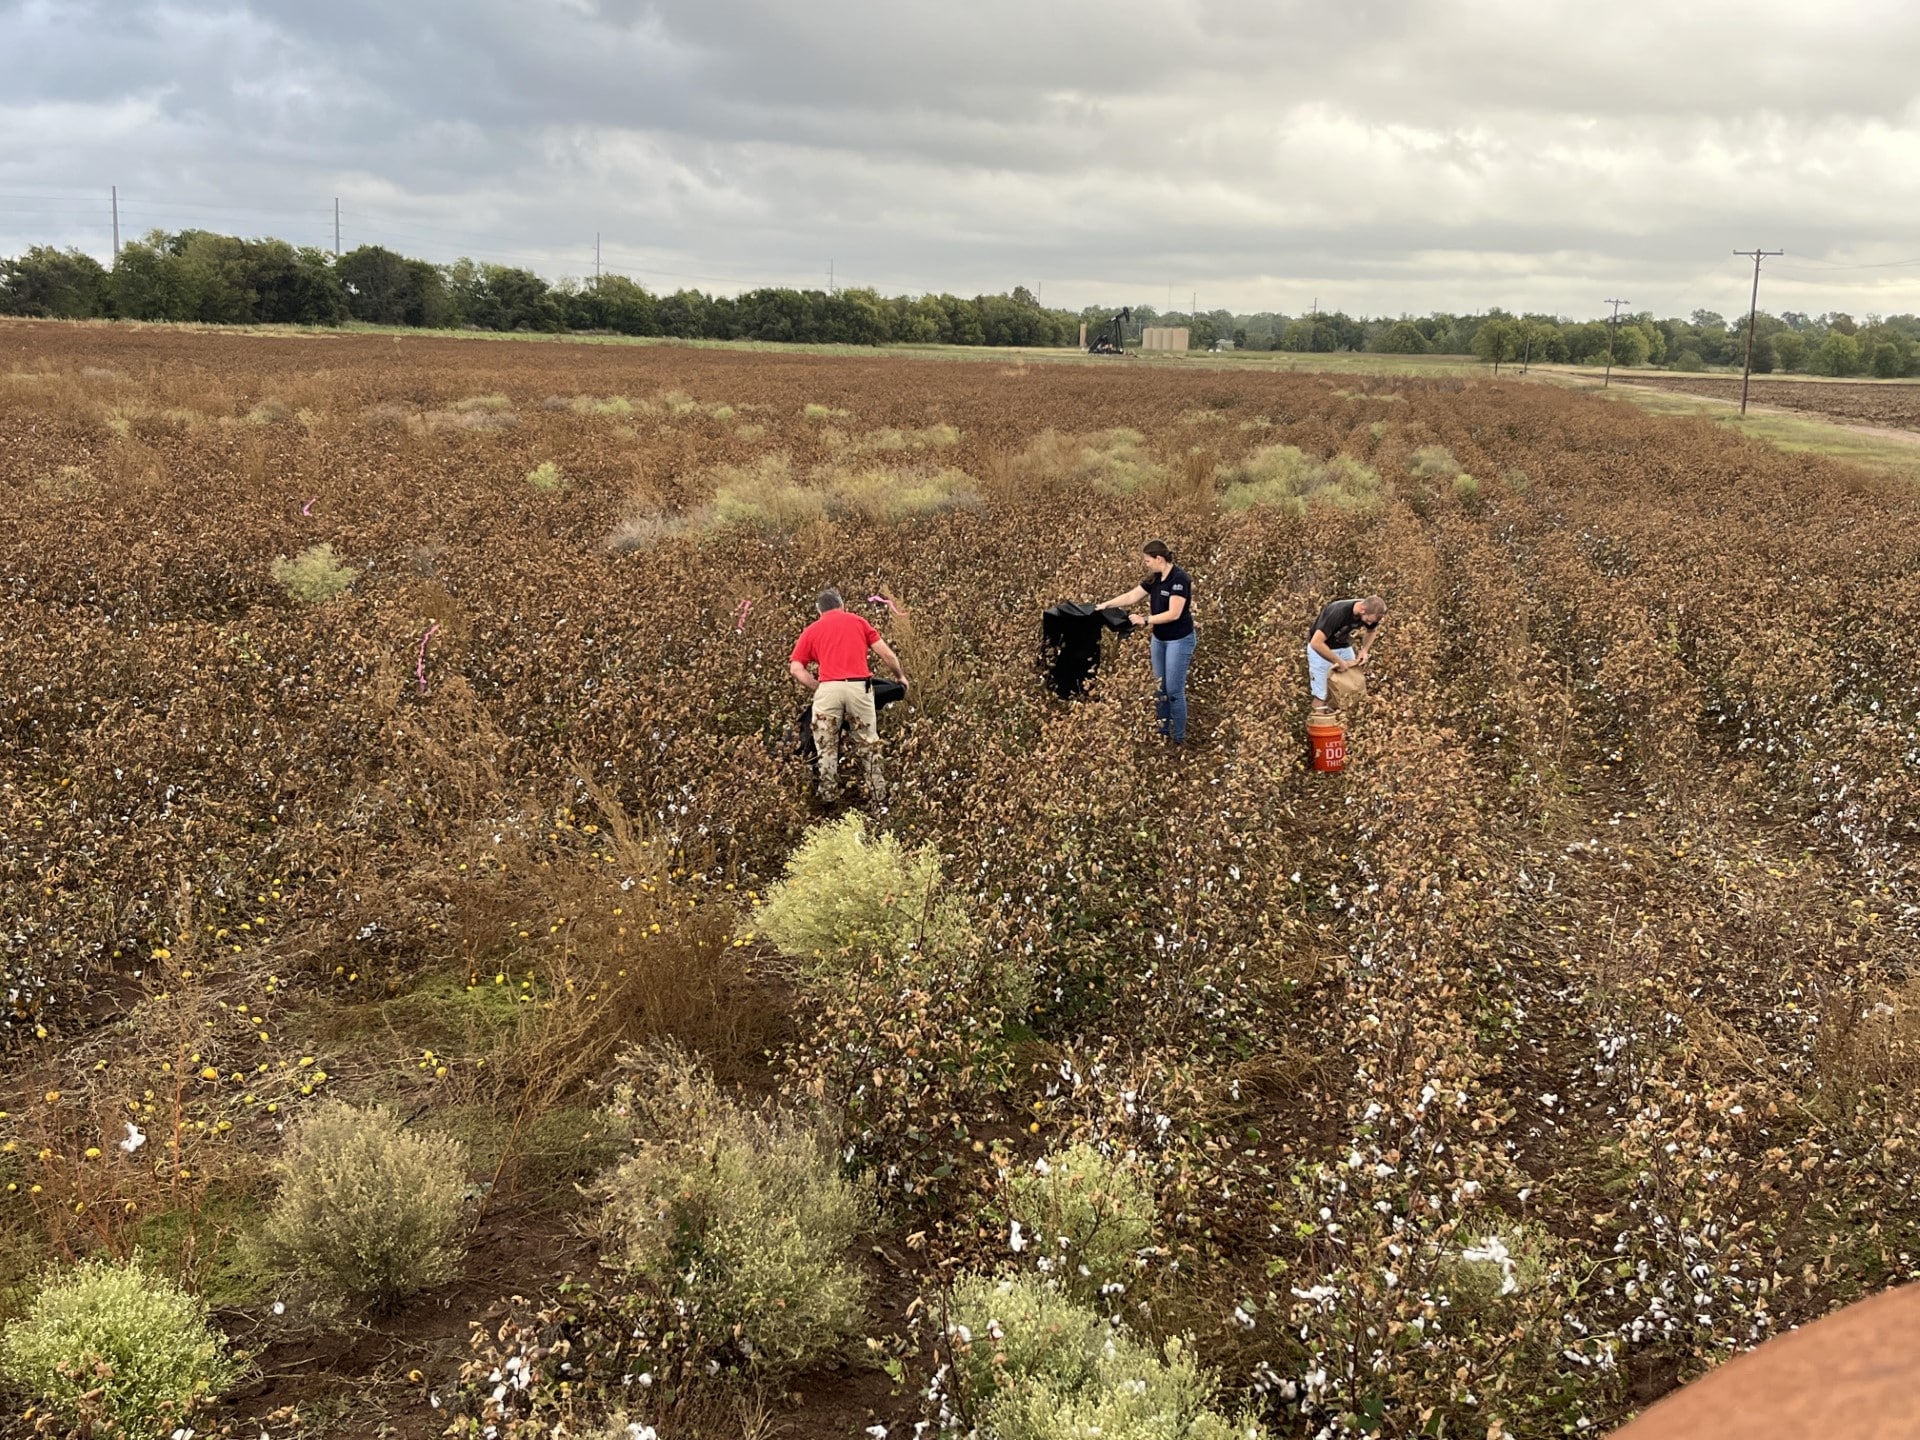 People collecting weed seed samples during cotton picking.